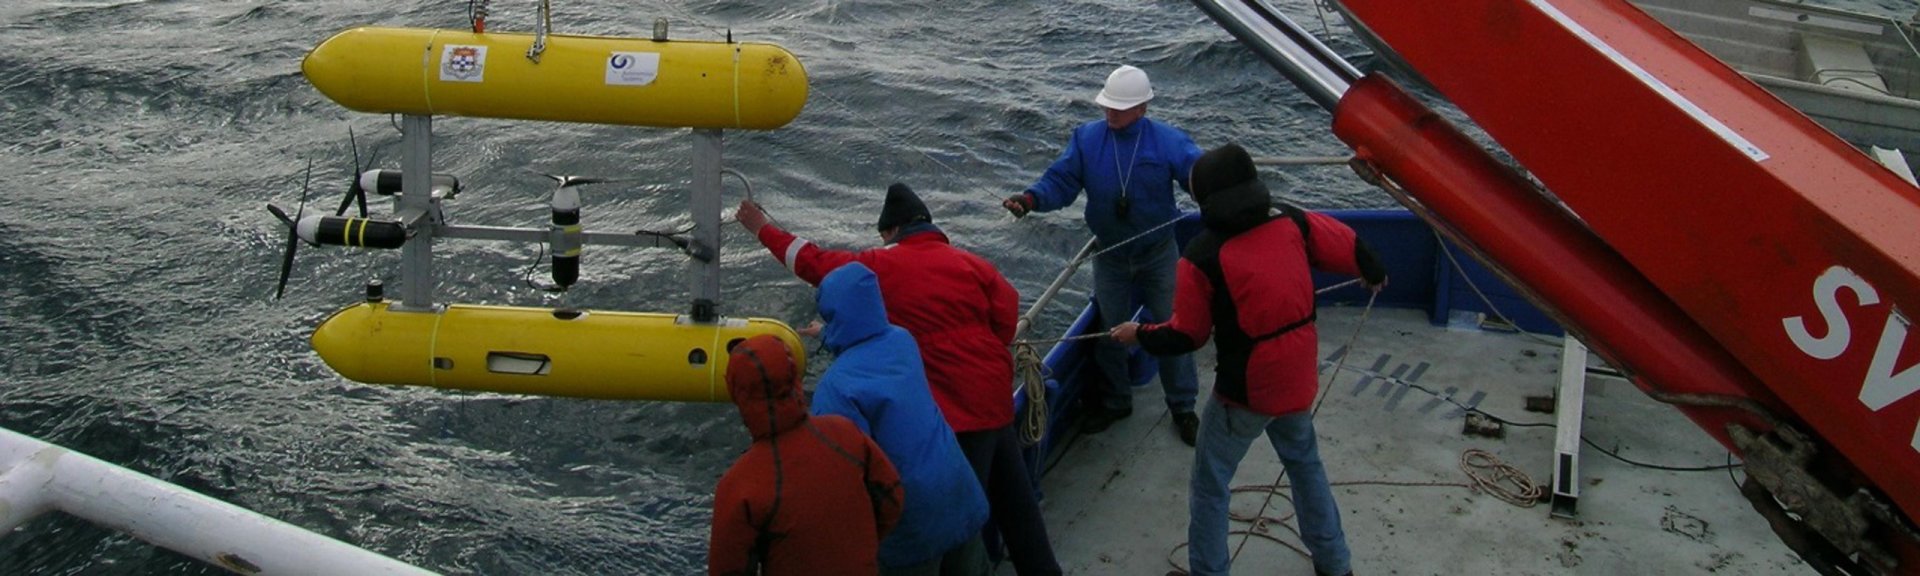 The launch of an autonomous underwater vehicle in Flinders Marine Park as part of the NESP